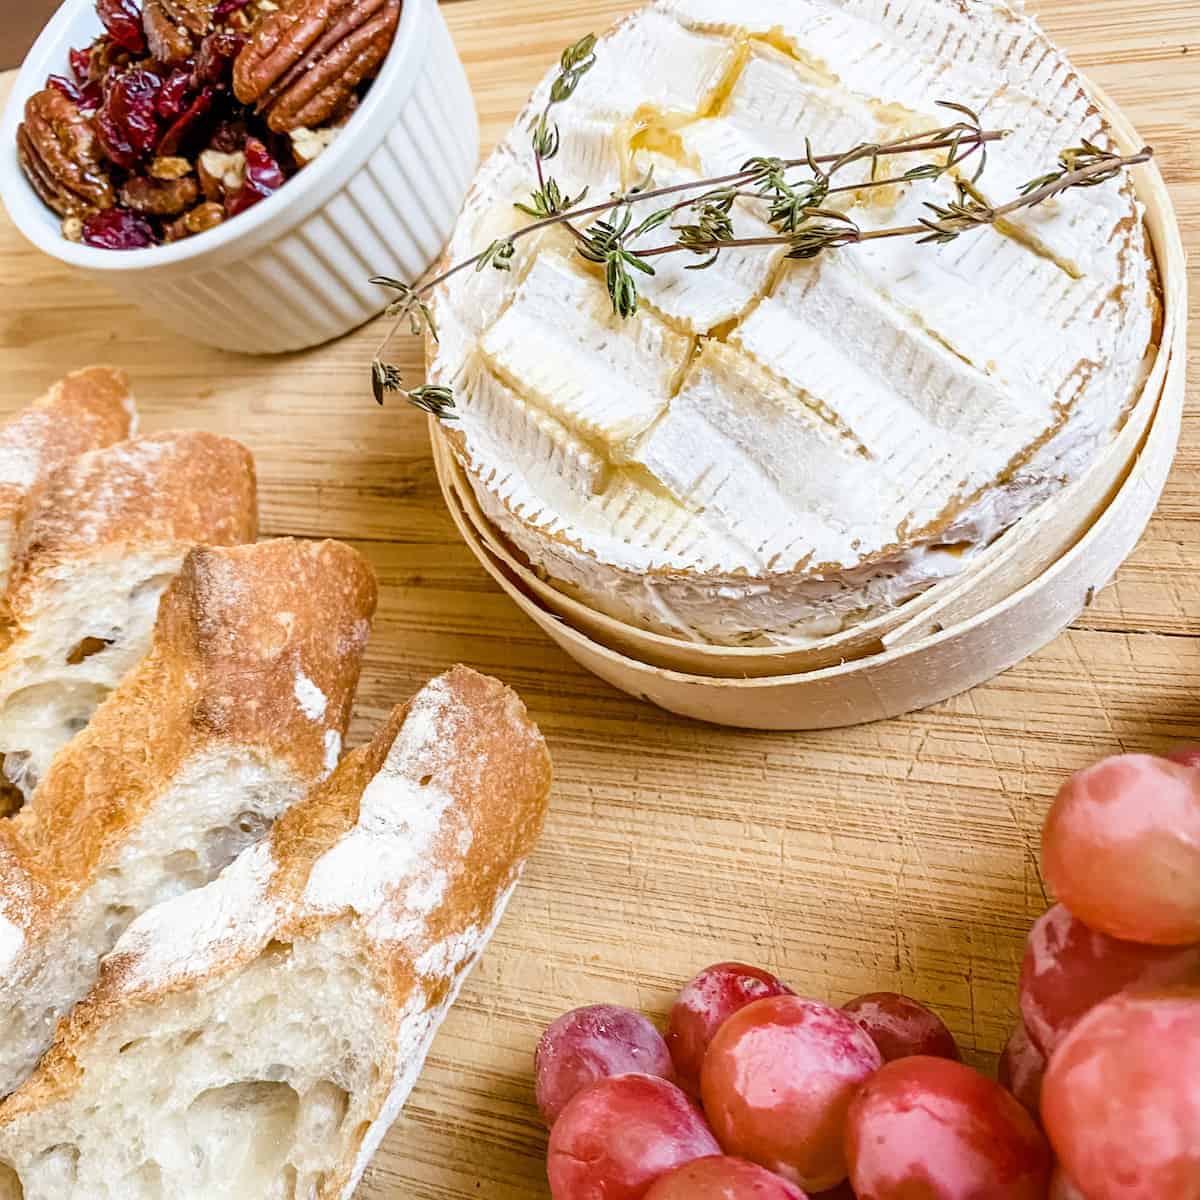 Baked camembert on a wooden serving board with grapes and bread.